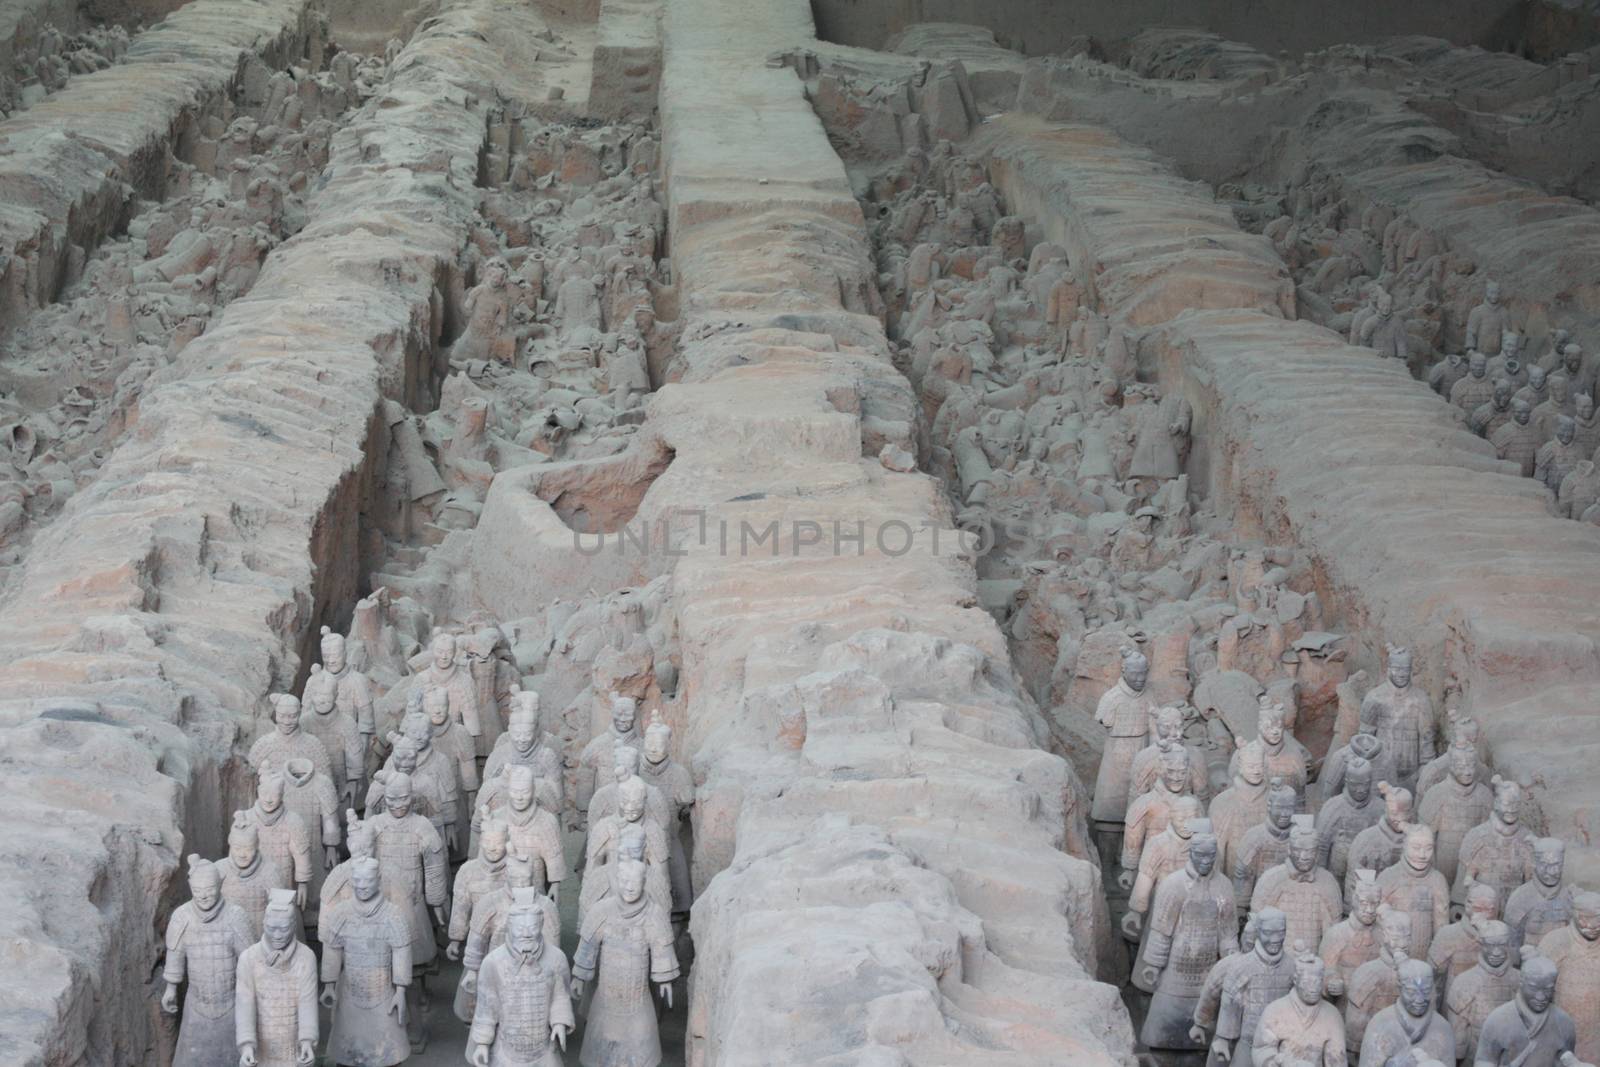 Terracotta Army, Mausoleum of the First Qin Emperor, China by vlad-m